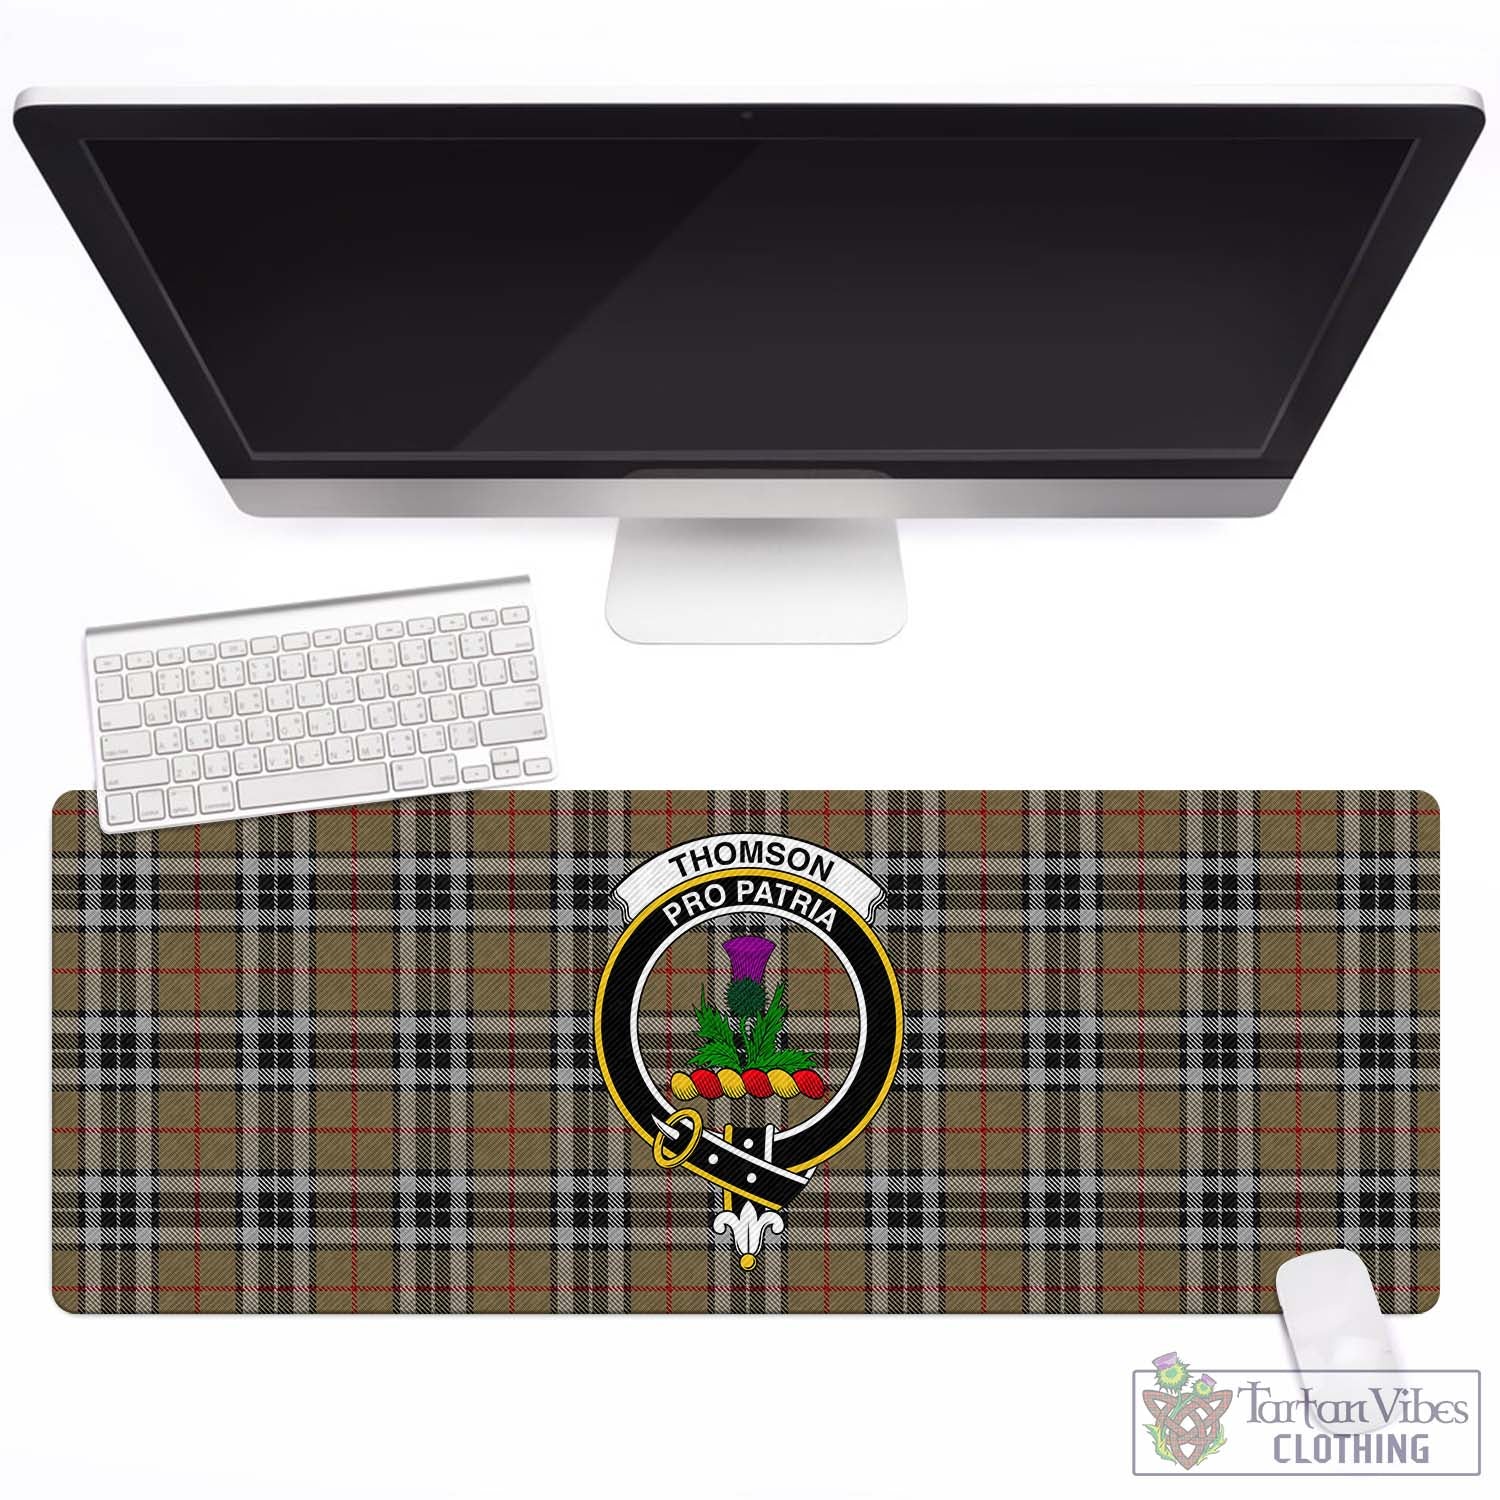 Tartan Vibes Clothing Thomson Camel Tartan Mouse Pad with Family Crest